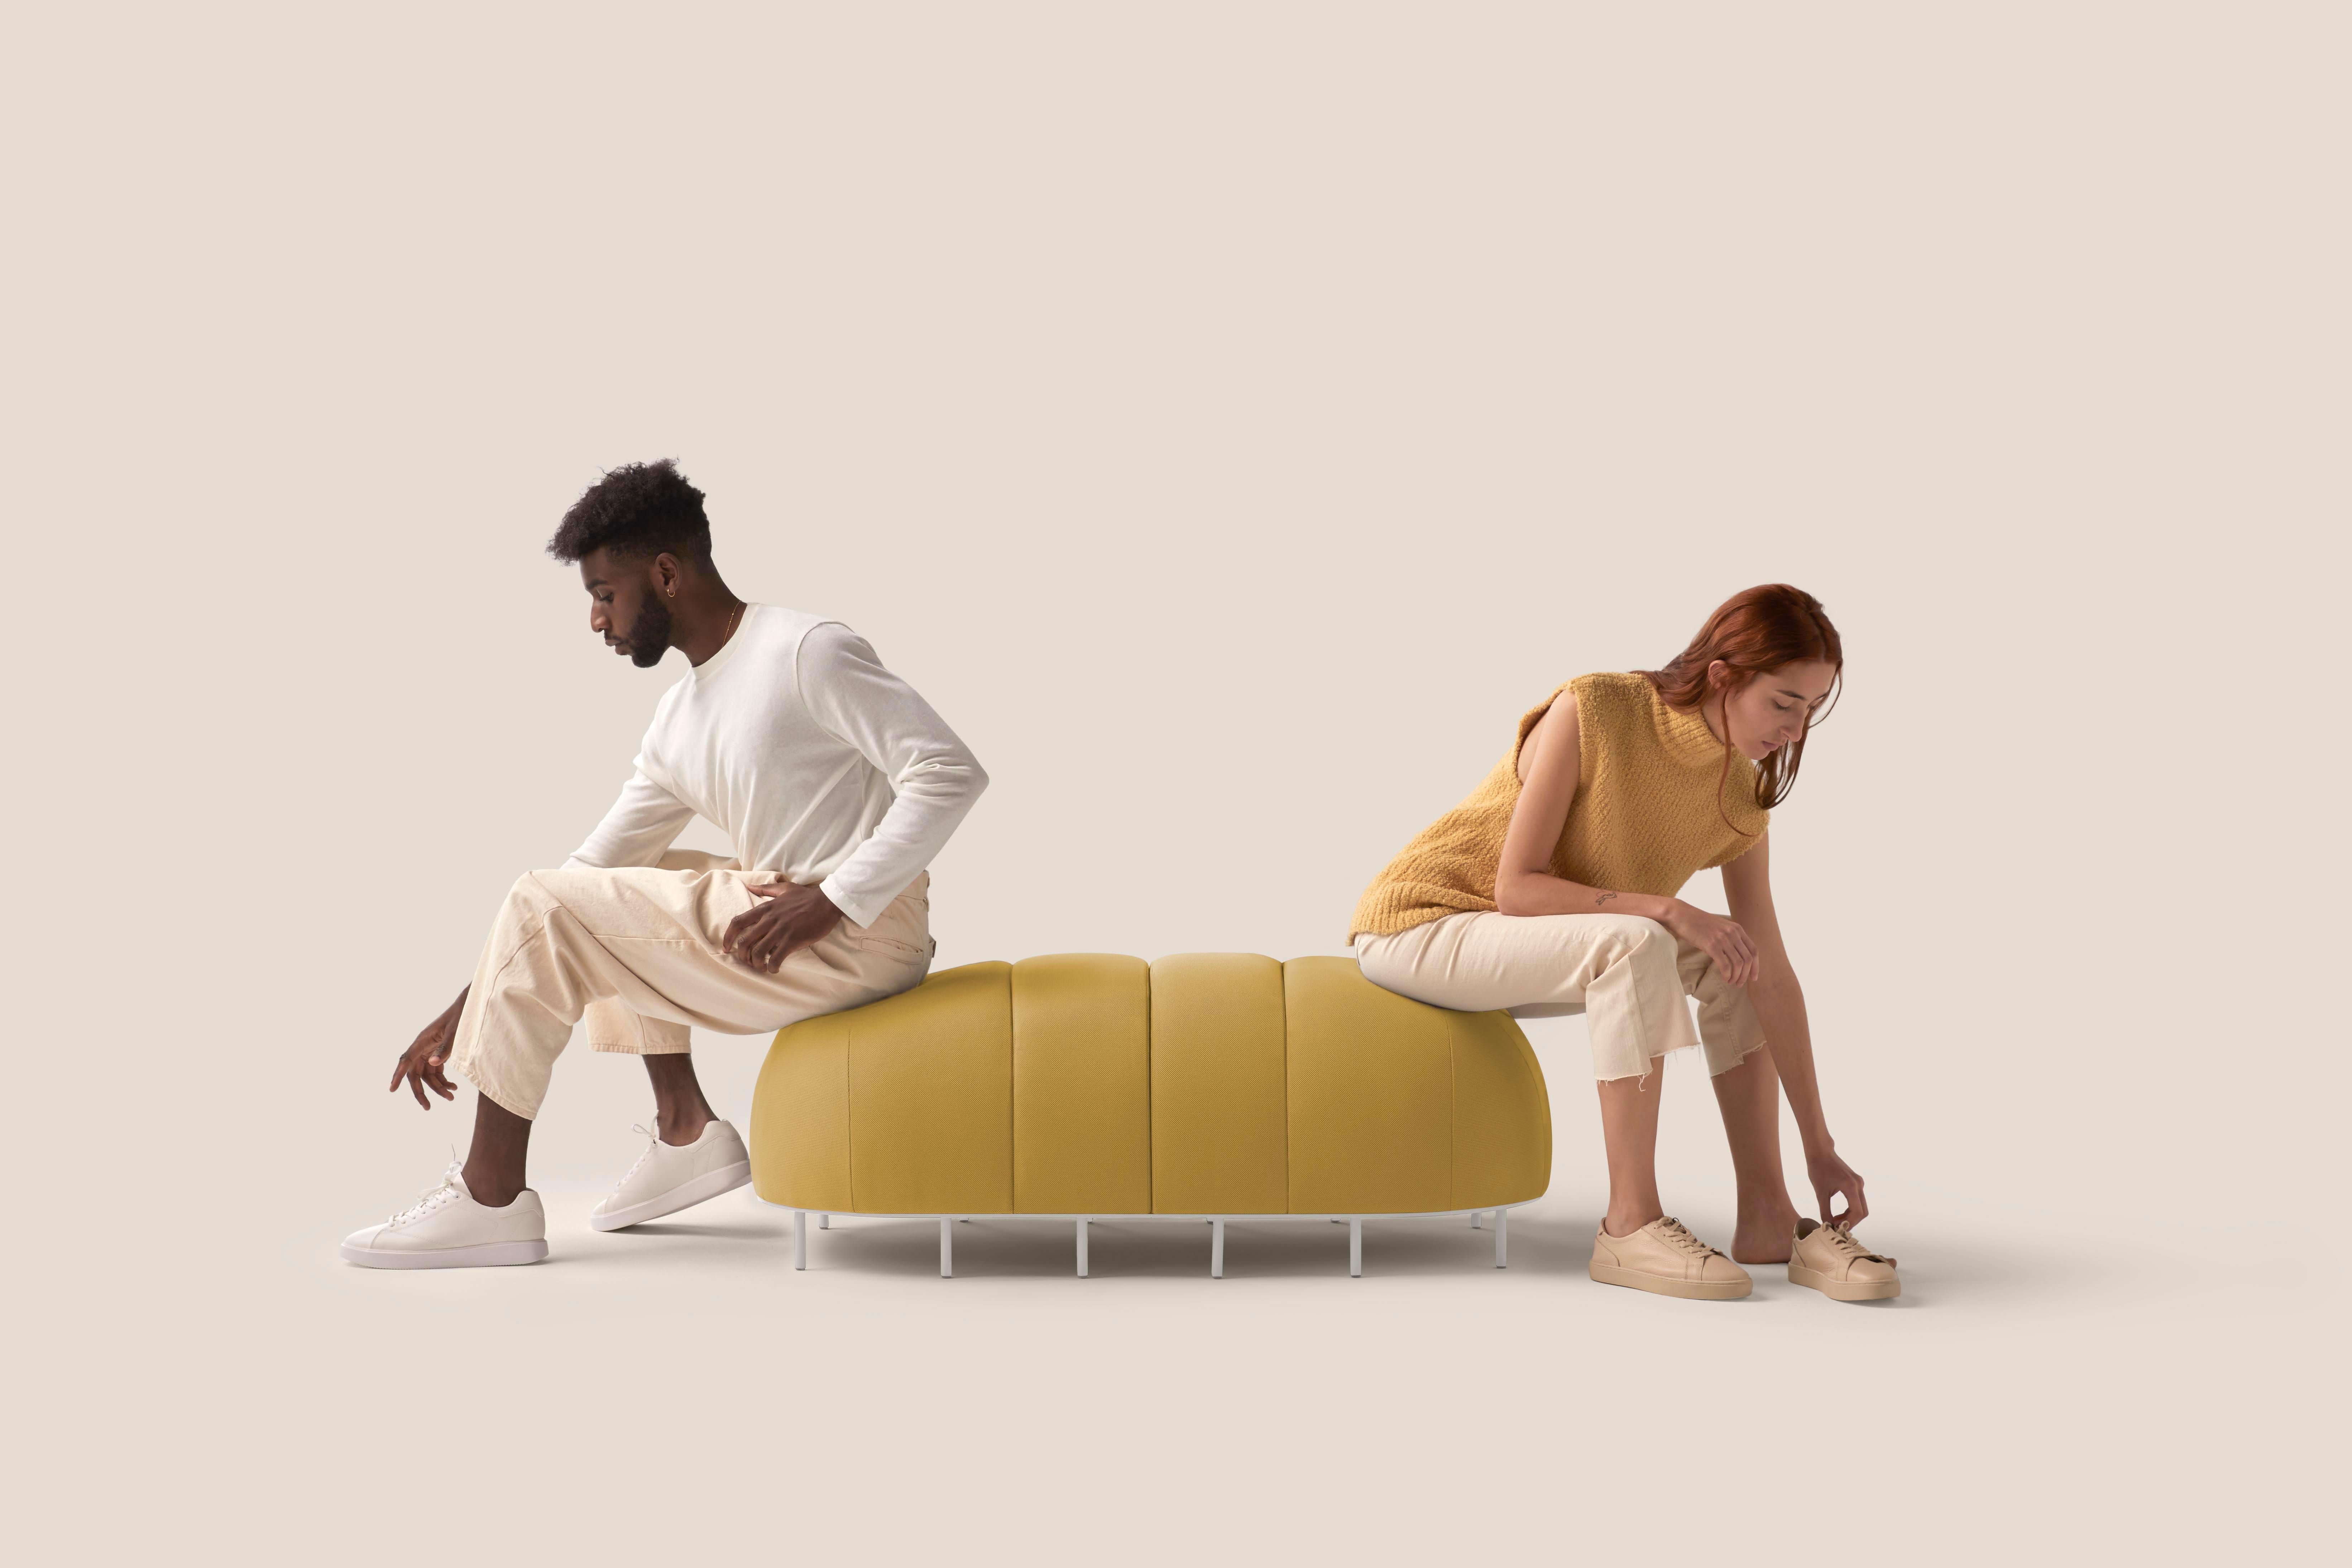 Straight module worm bench by Pepe Albargues
Dimensions: D 65 x W 50 x H 50 cm
Materials: Plywood, foam CMHR, iron
Available in different colors. End and Curved modules available.

Worm is an amusing bench that can evolve and change according